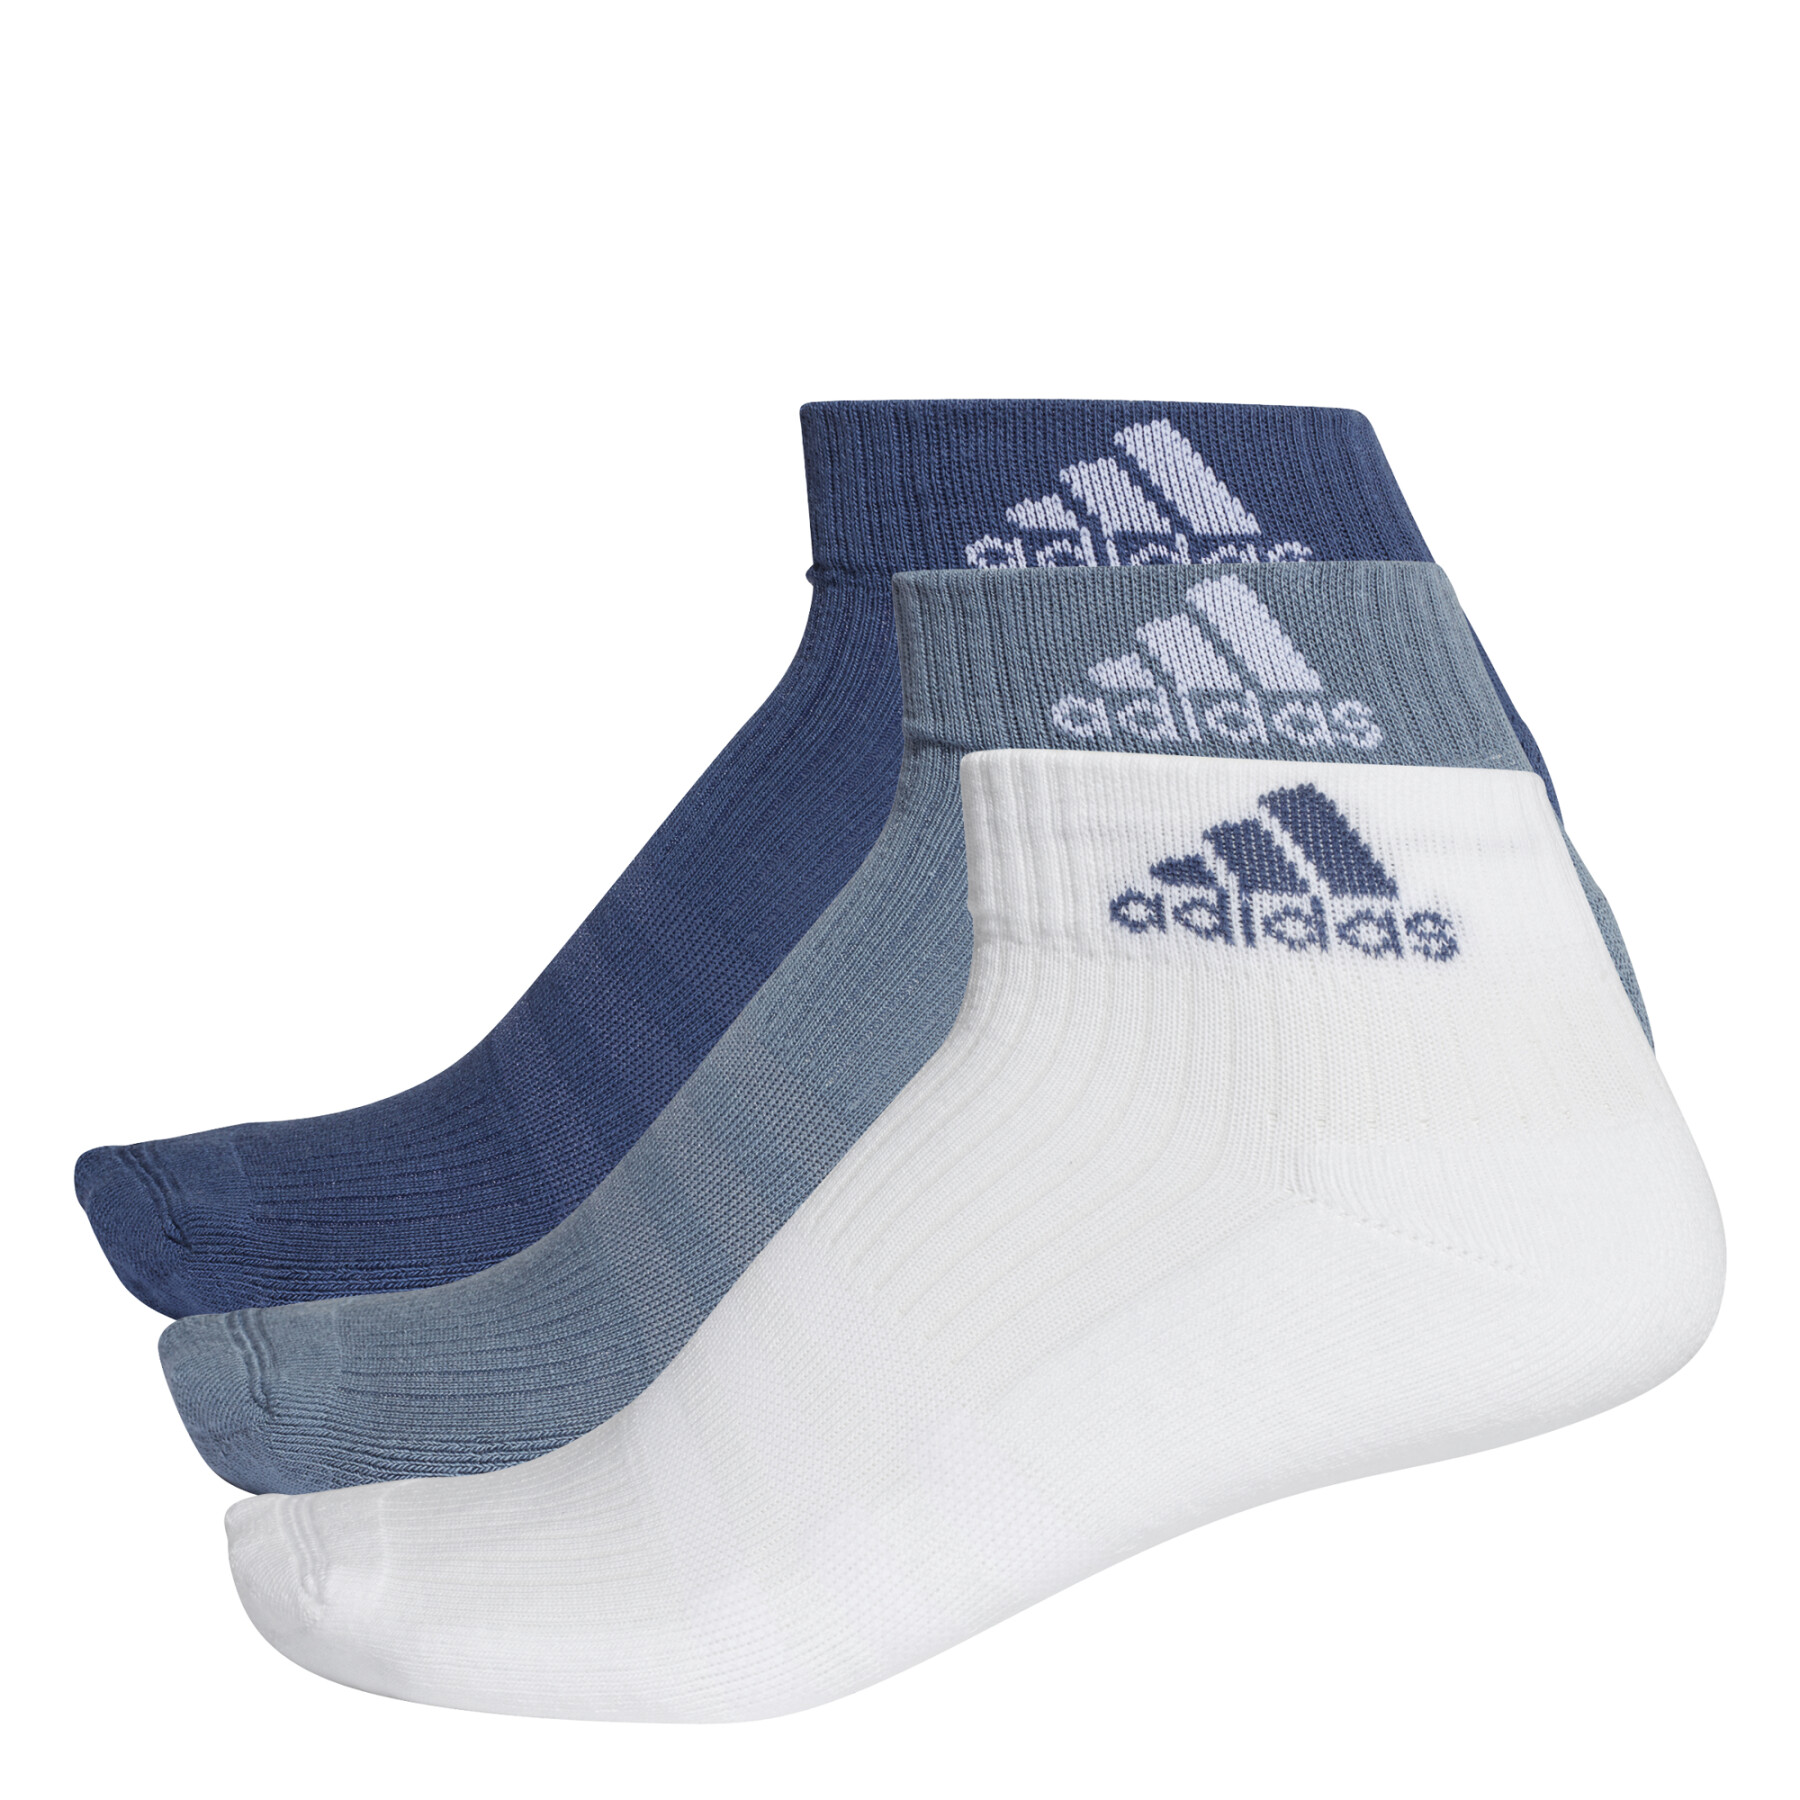 Calcetines adidas 3-Stripes Performance (3 paires)